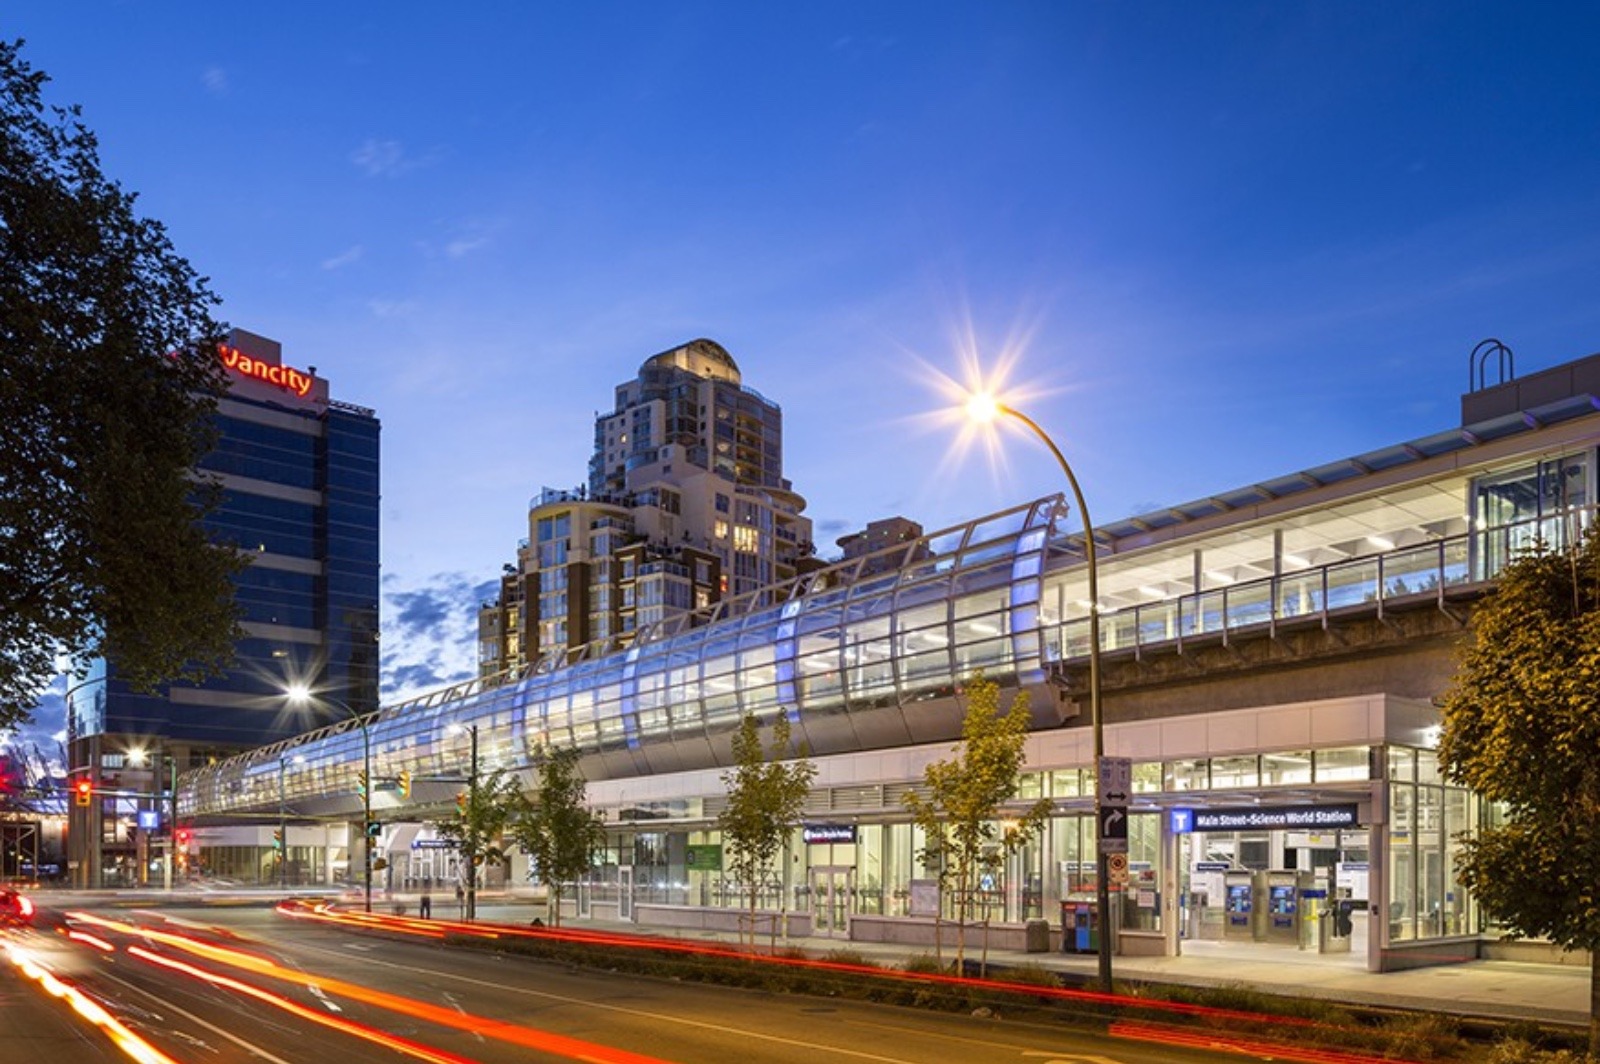 Robertson Walls & Ceilings Completed Projects
Infrastructure: Main Street SkyTrain Station
Completed 2015